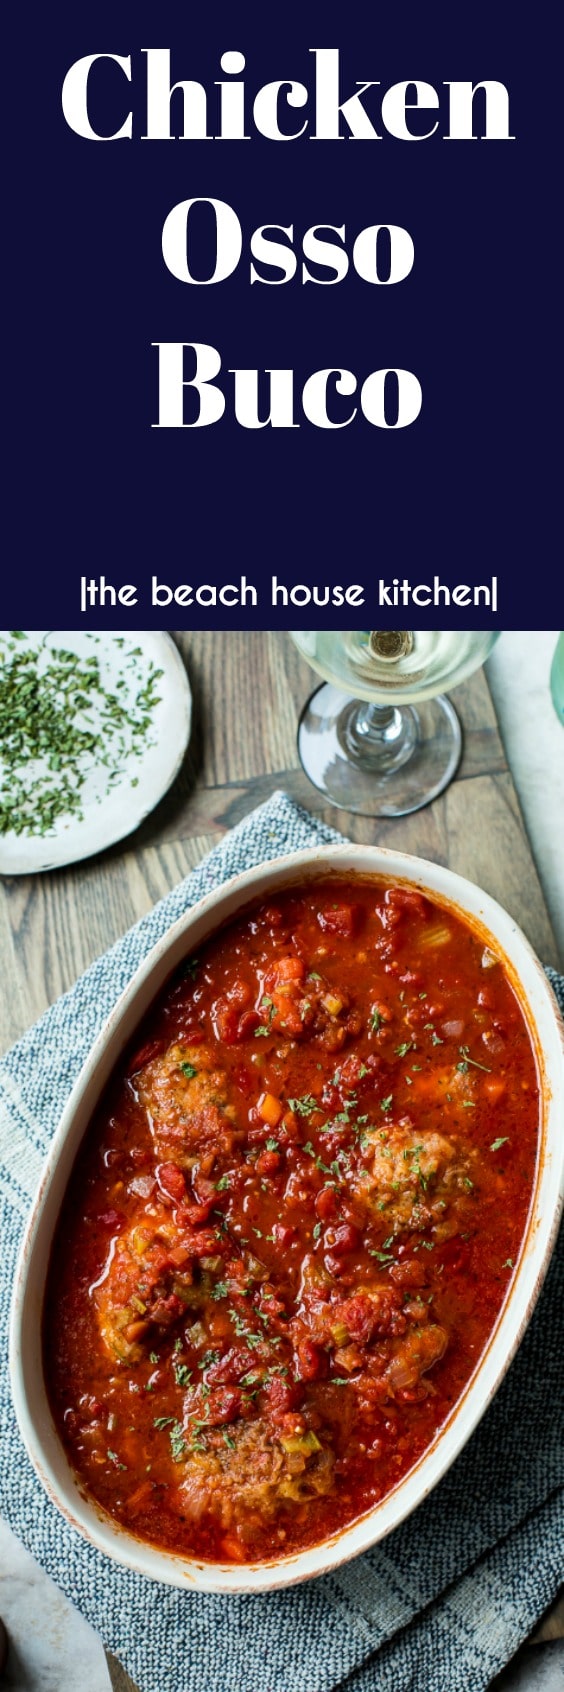 Chicken Osso Buco - The Beach House Kitchen